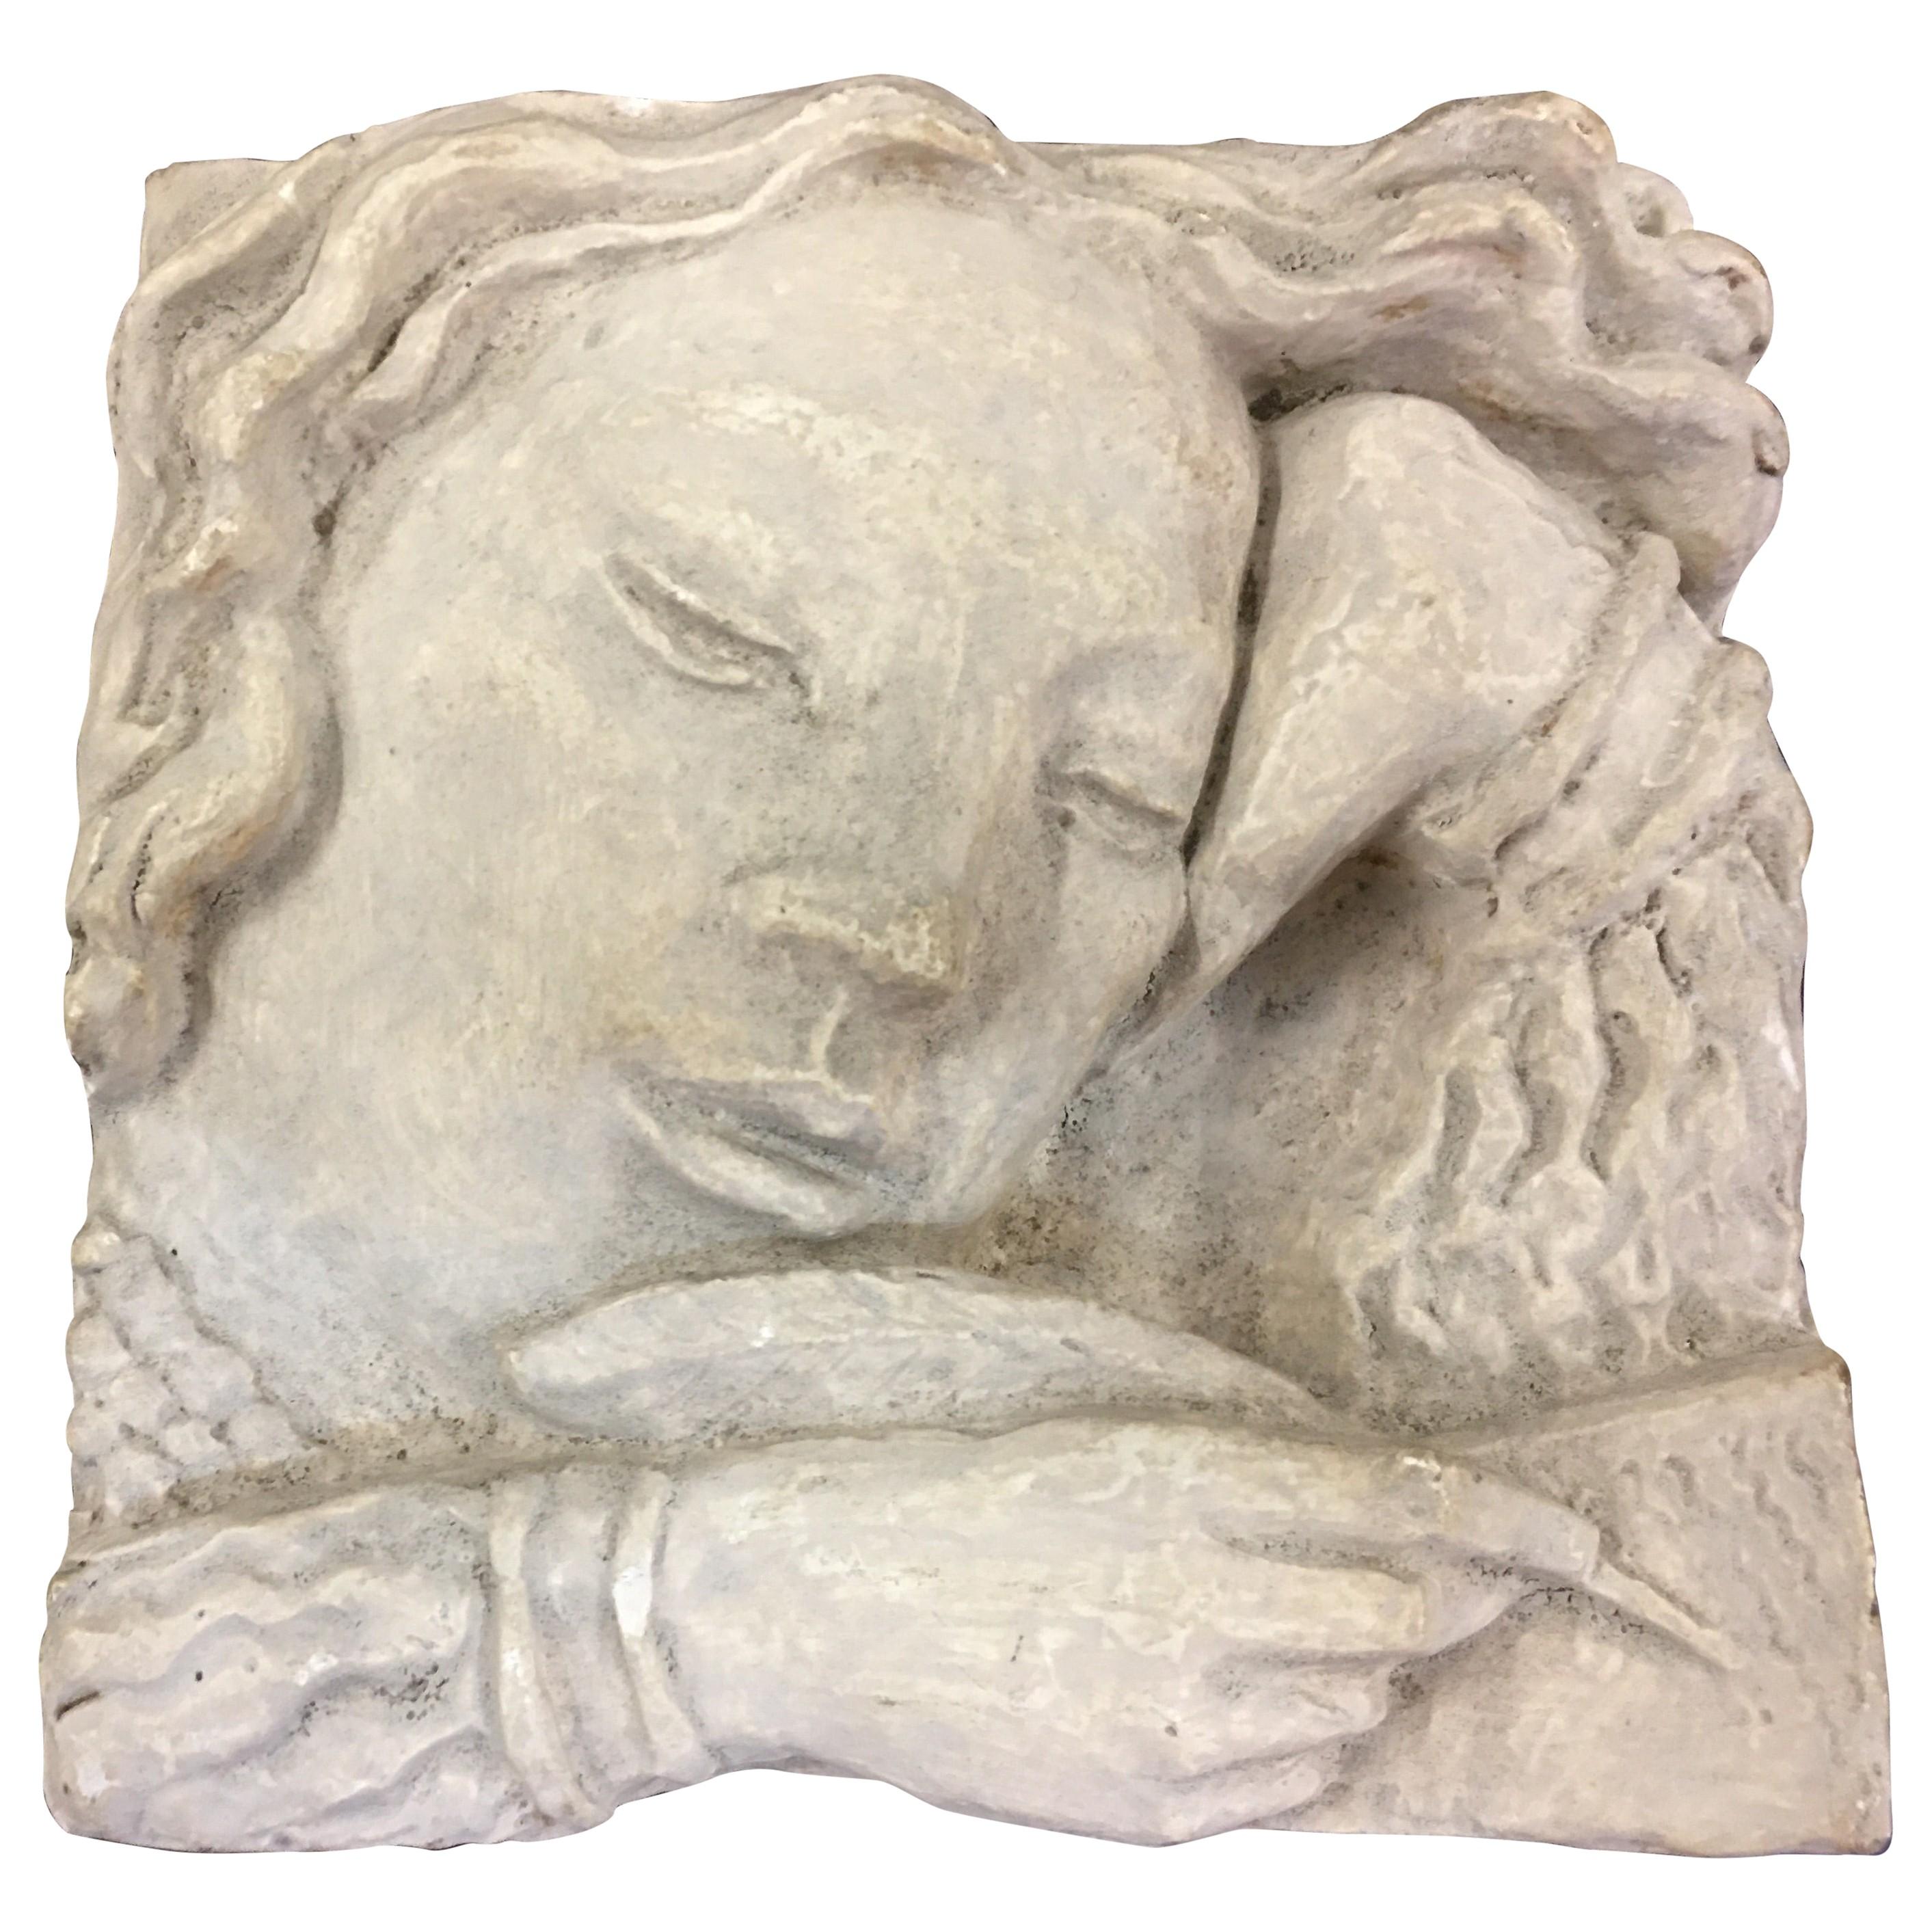  Small Art Deco Bas-Relief in Plaster, Signed,  G. WATKIN  1942 For Sale